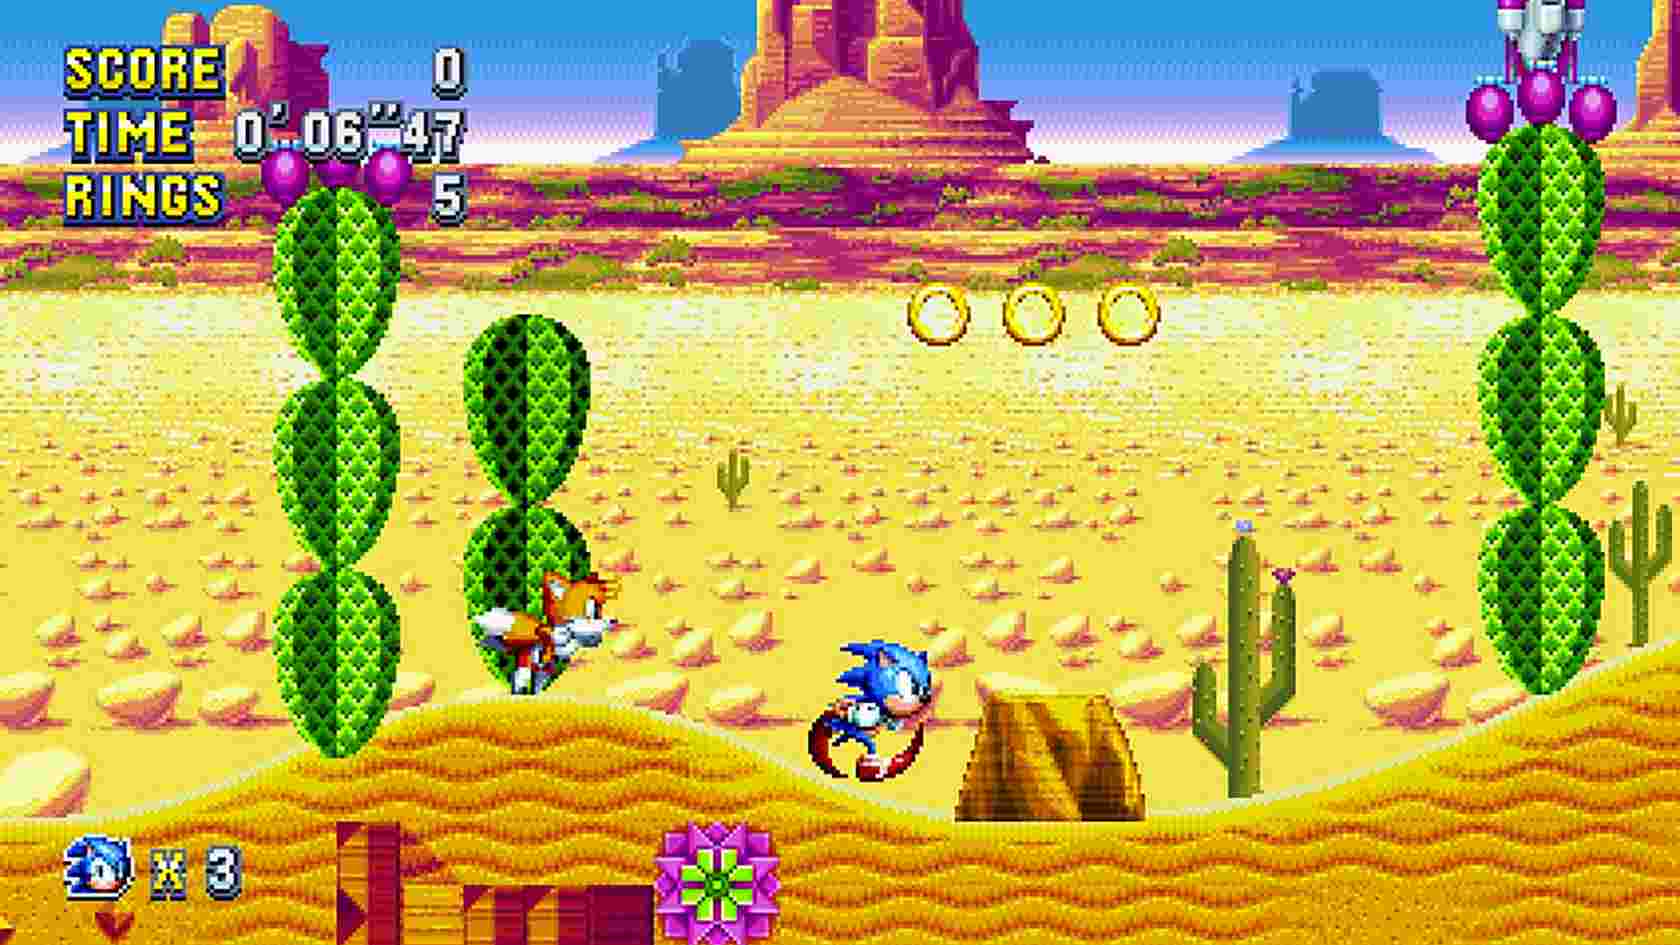 Sonic Mania Plus Download Android